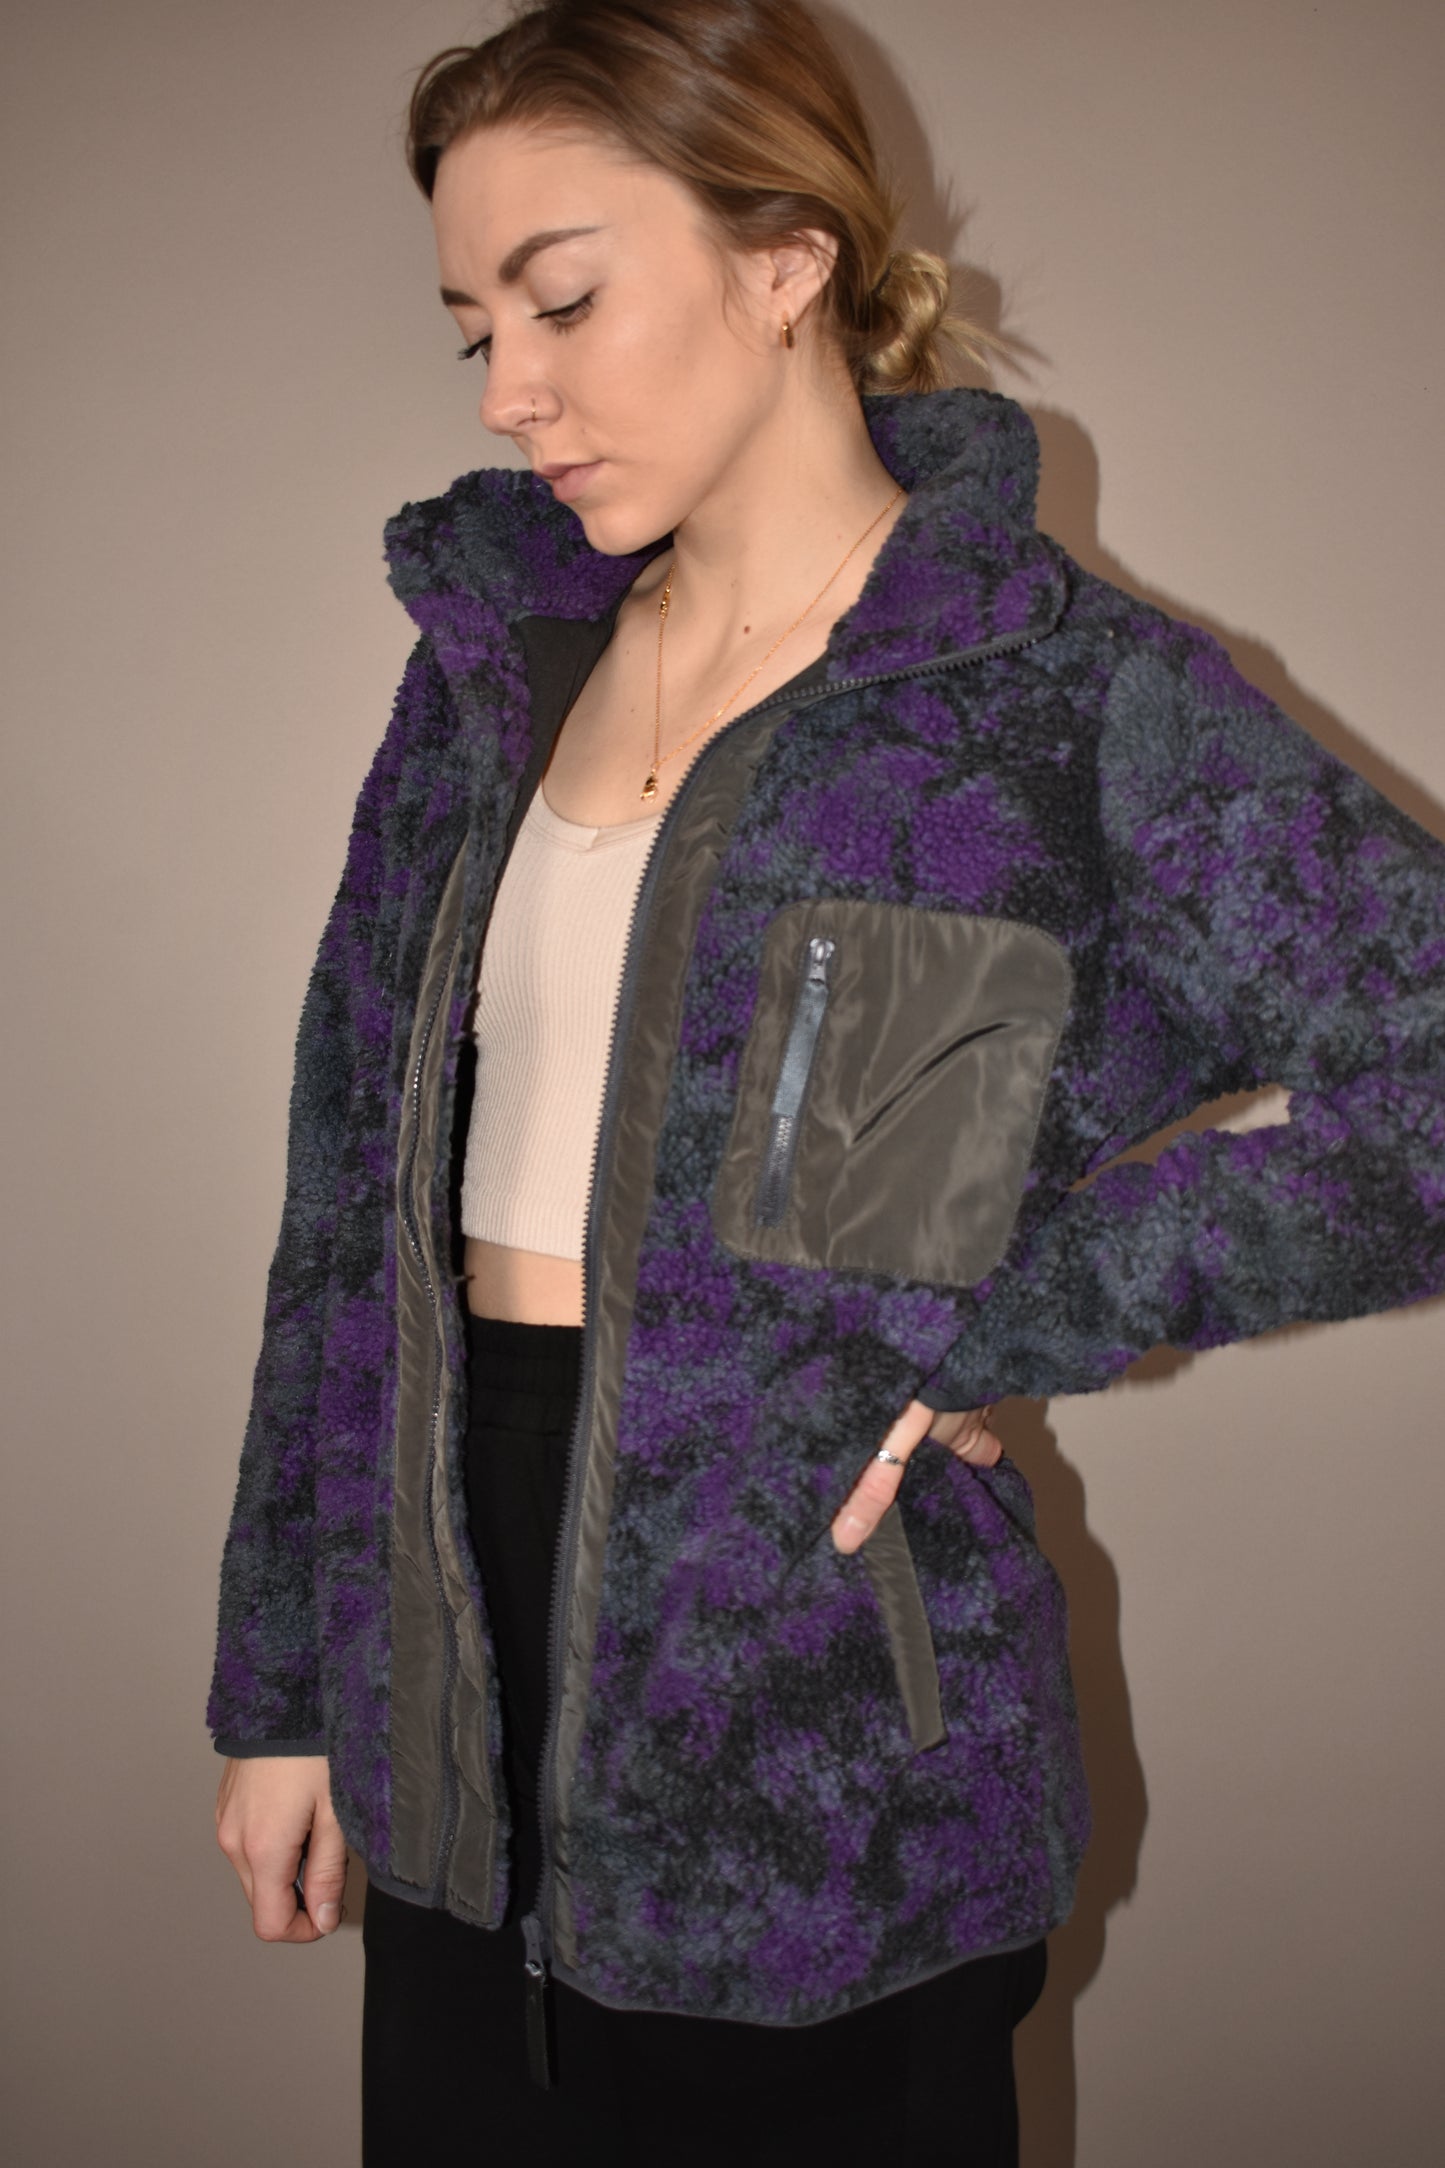 purple, black and gray tie dye full front zip sherpa jacket with one zip breast pocket and side pockets. zips up to a turtleneck and full length.